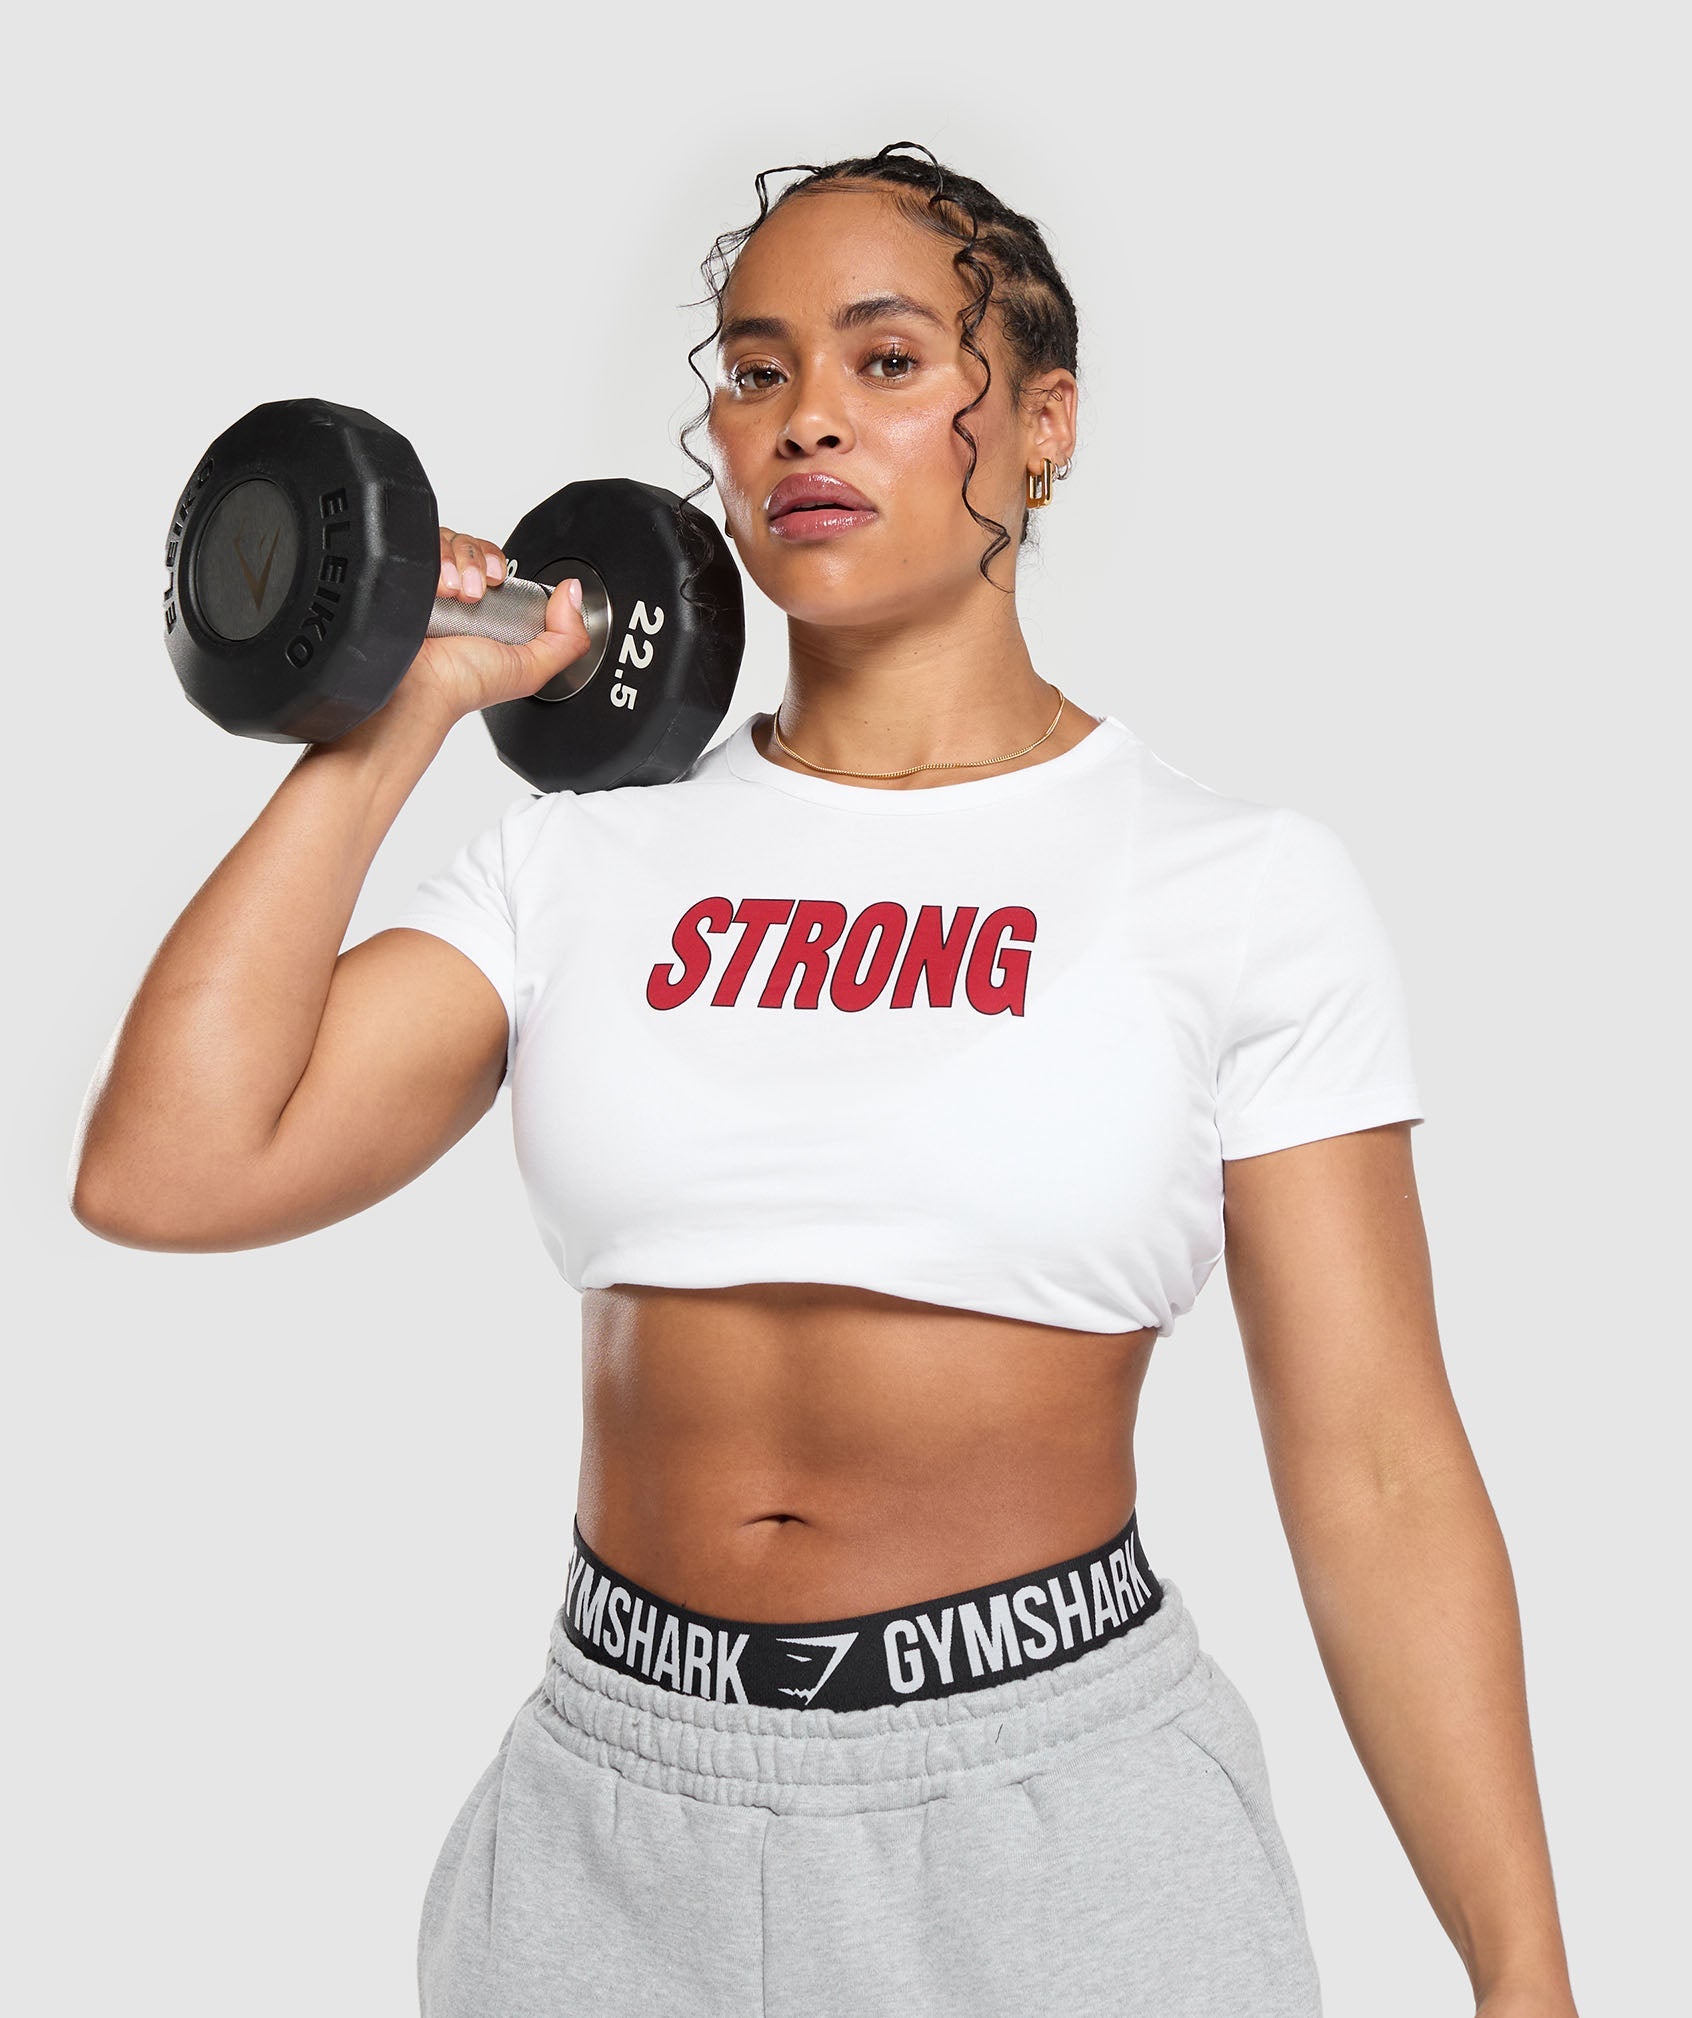 Strong Lifter Baby Tee in White - view 7